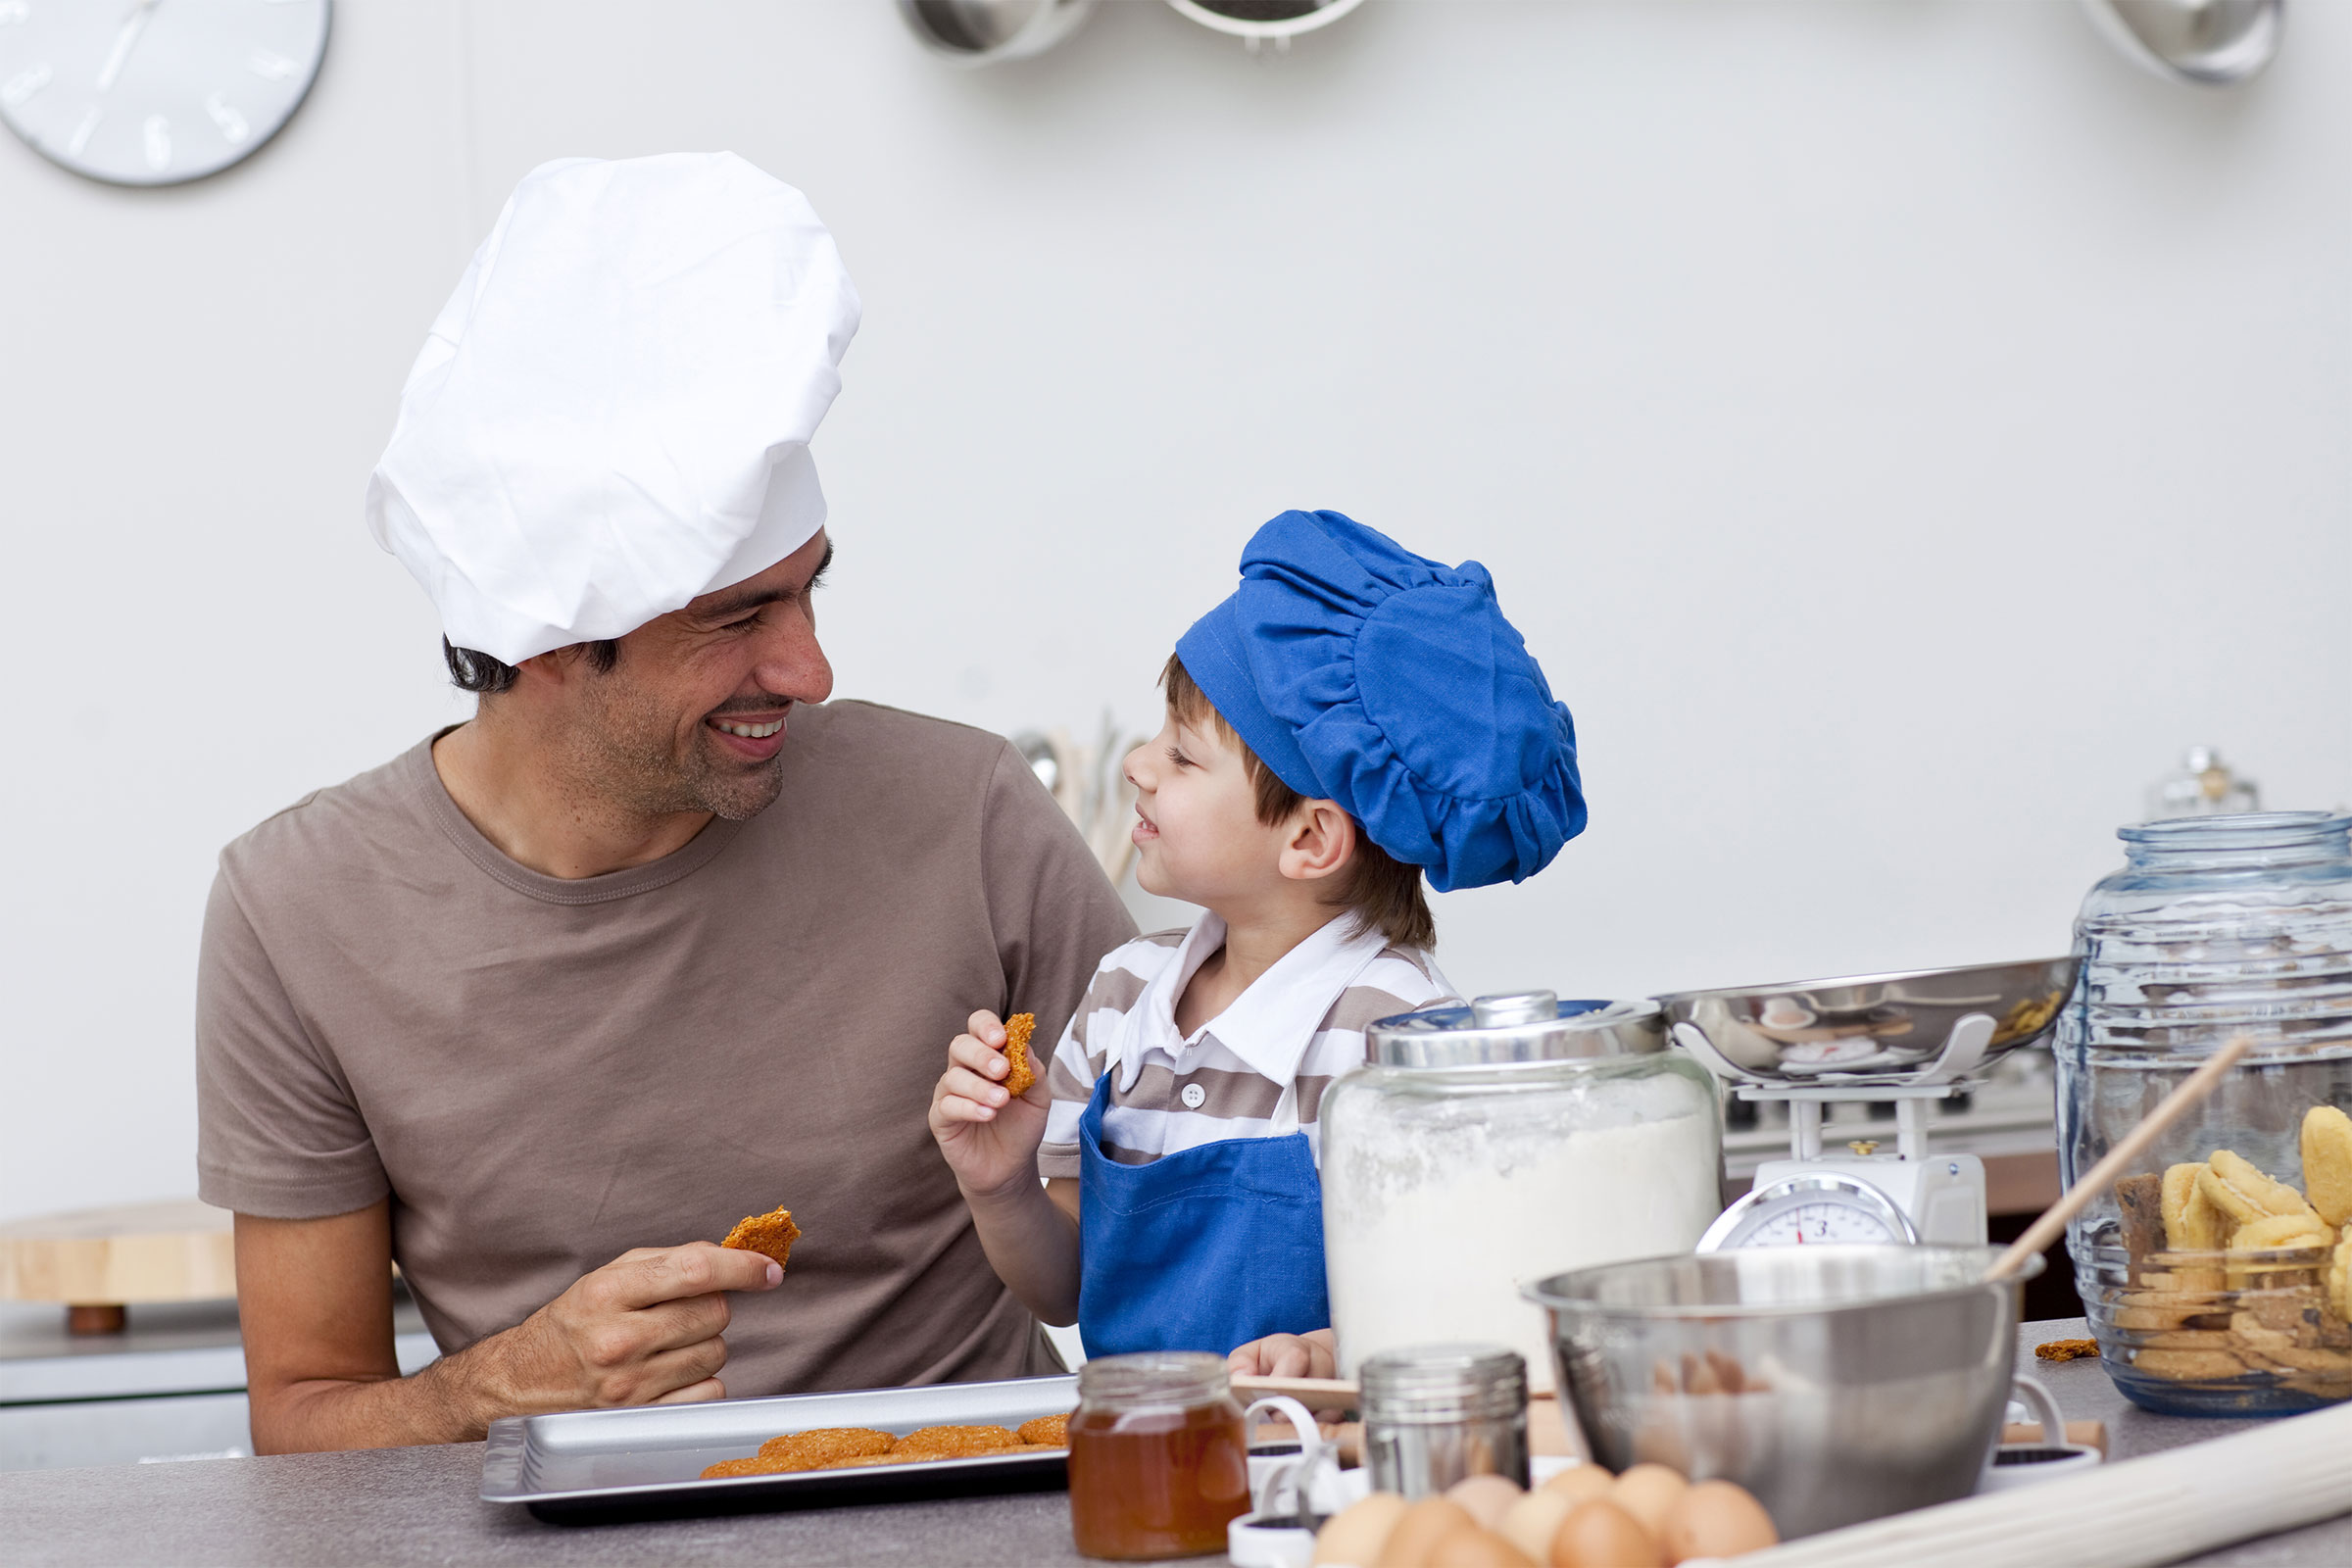 Parent and child cooking together